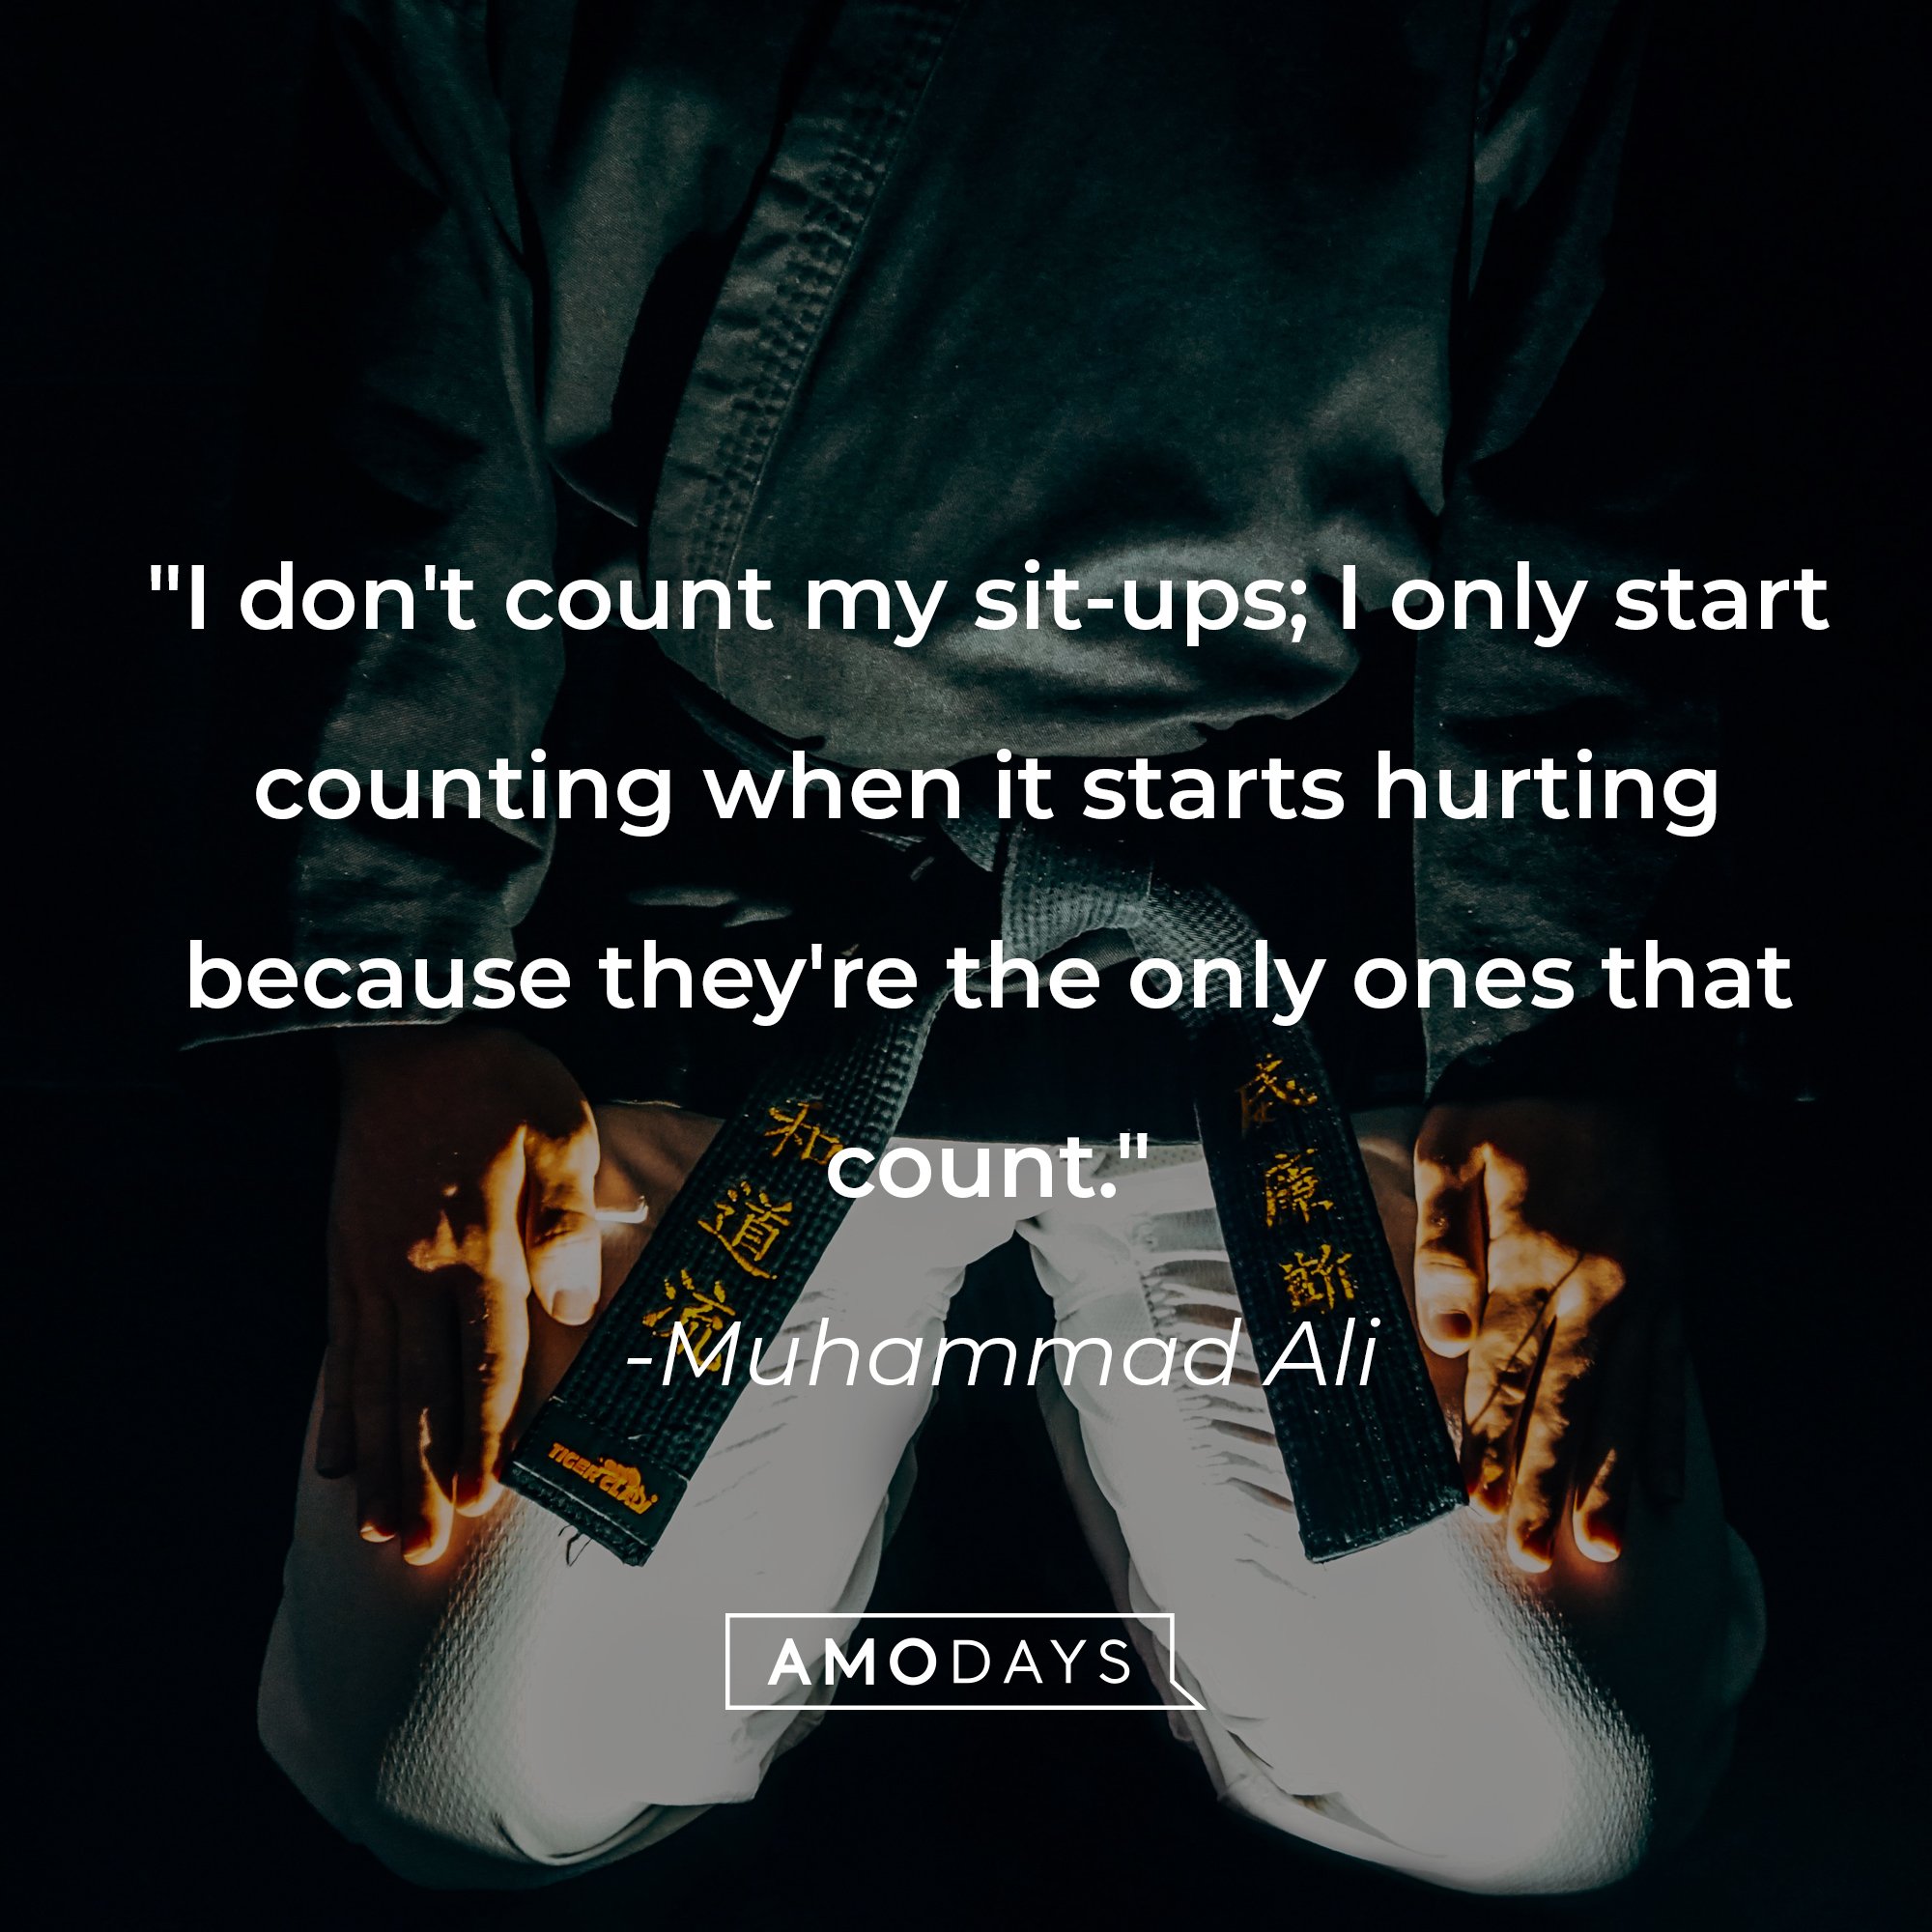 Muhammad Ali’s quote: "I don't count my sit-ups; I only start counting when it starts hurting because they're the only ones that count." | Image: AmoDays    